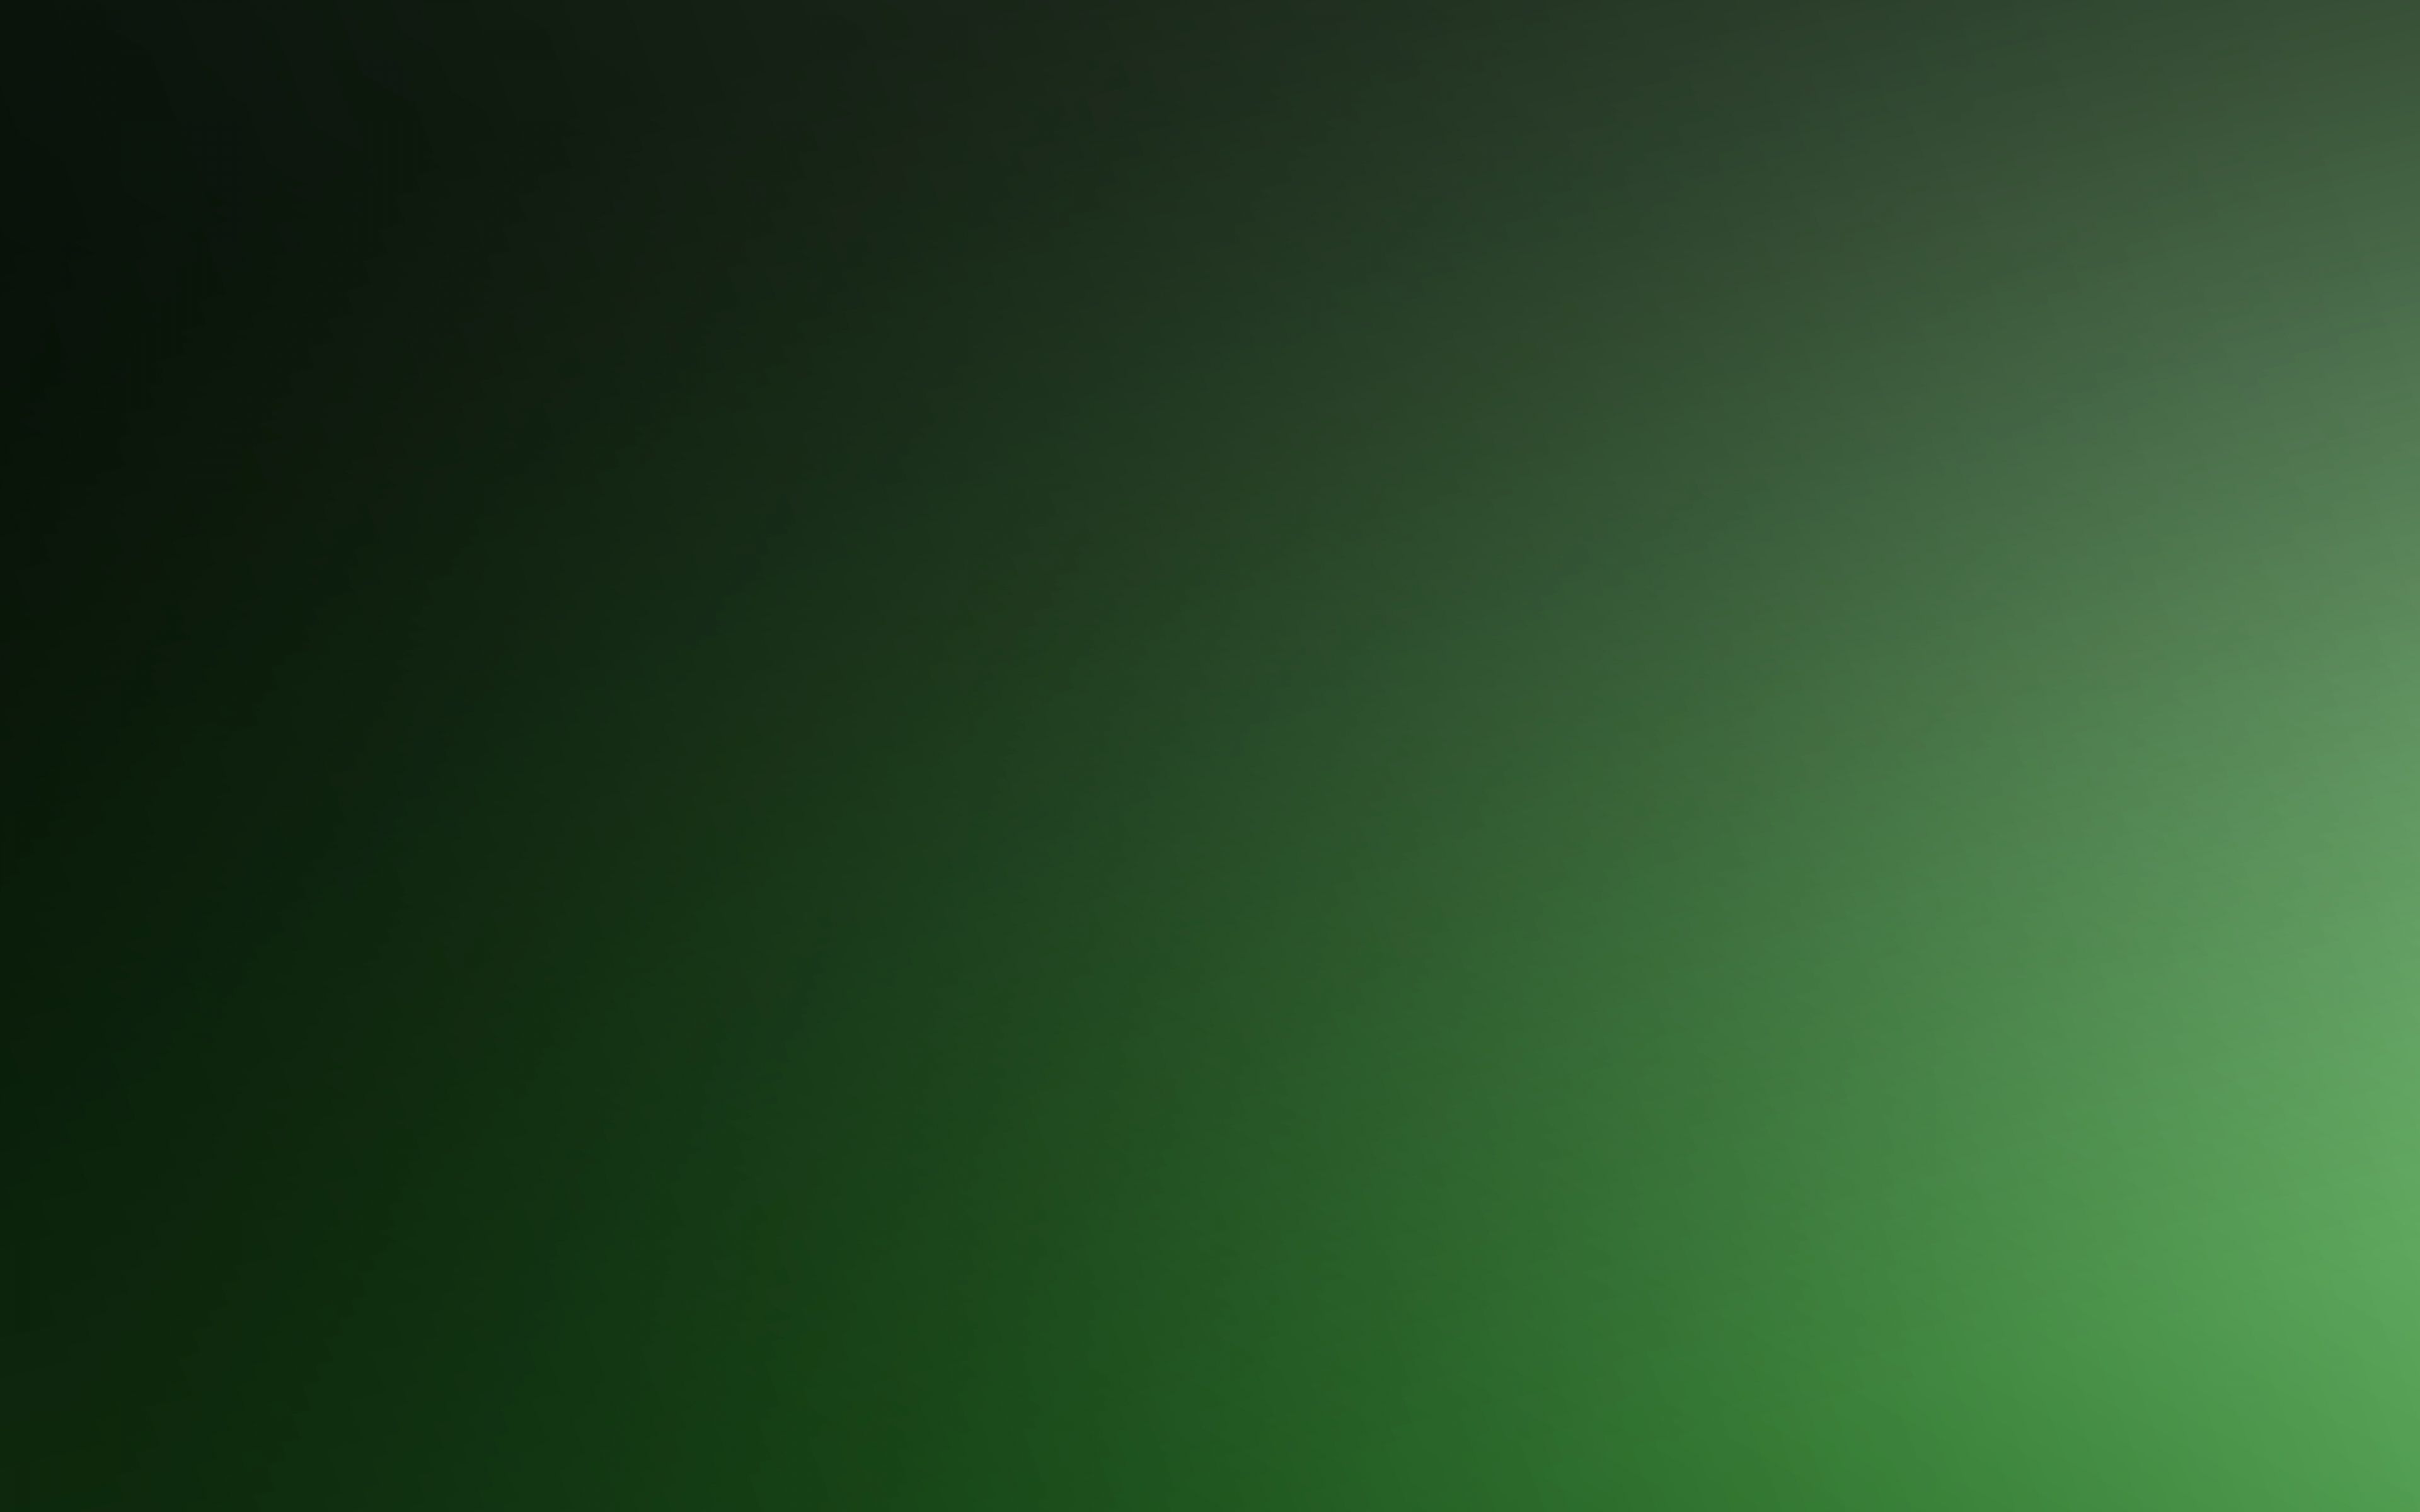 Download Wallpaper 3840x2400 Green, Background, Texture, Solid ...